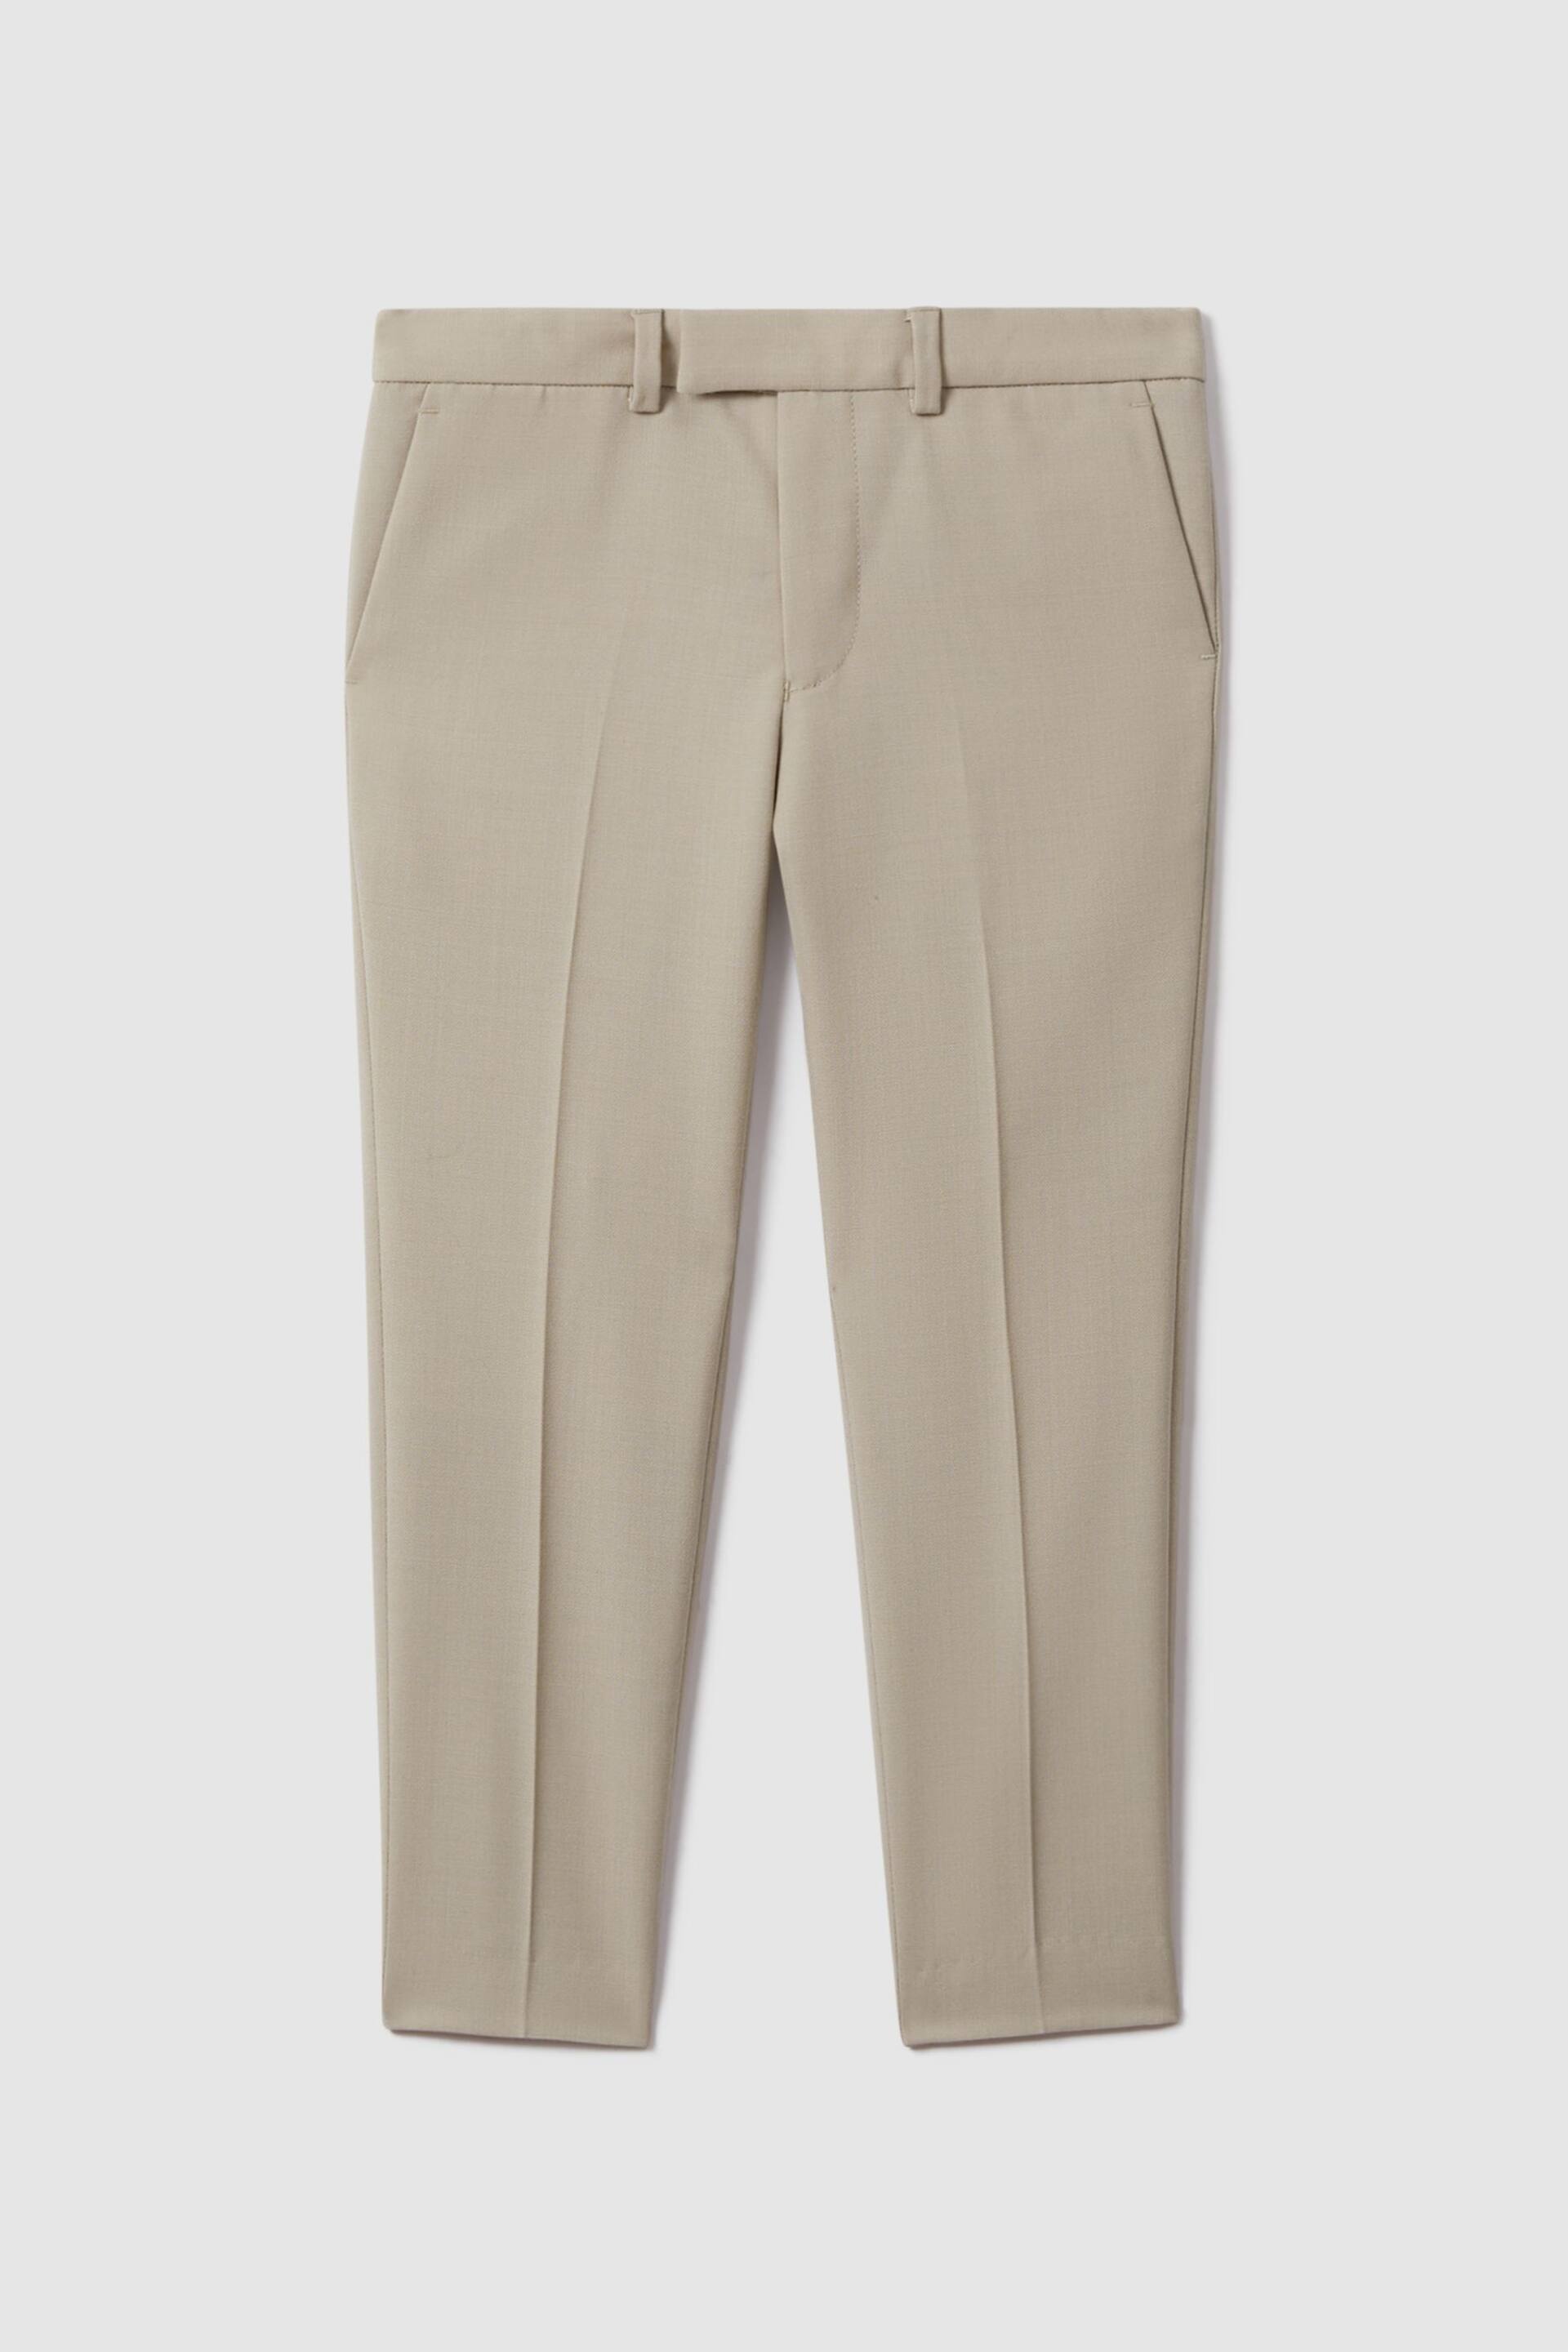 Reiss Stone Fine Senior Wool Side Adjusters Trousers - Image 2 of 4